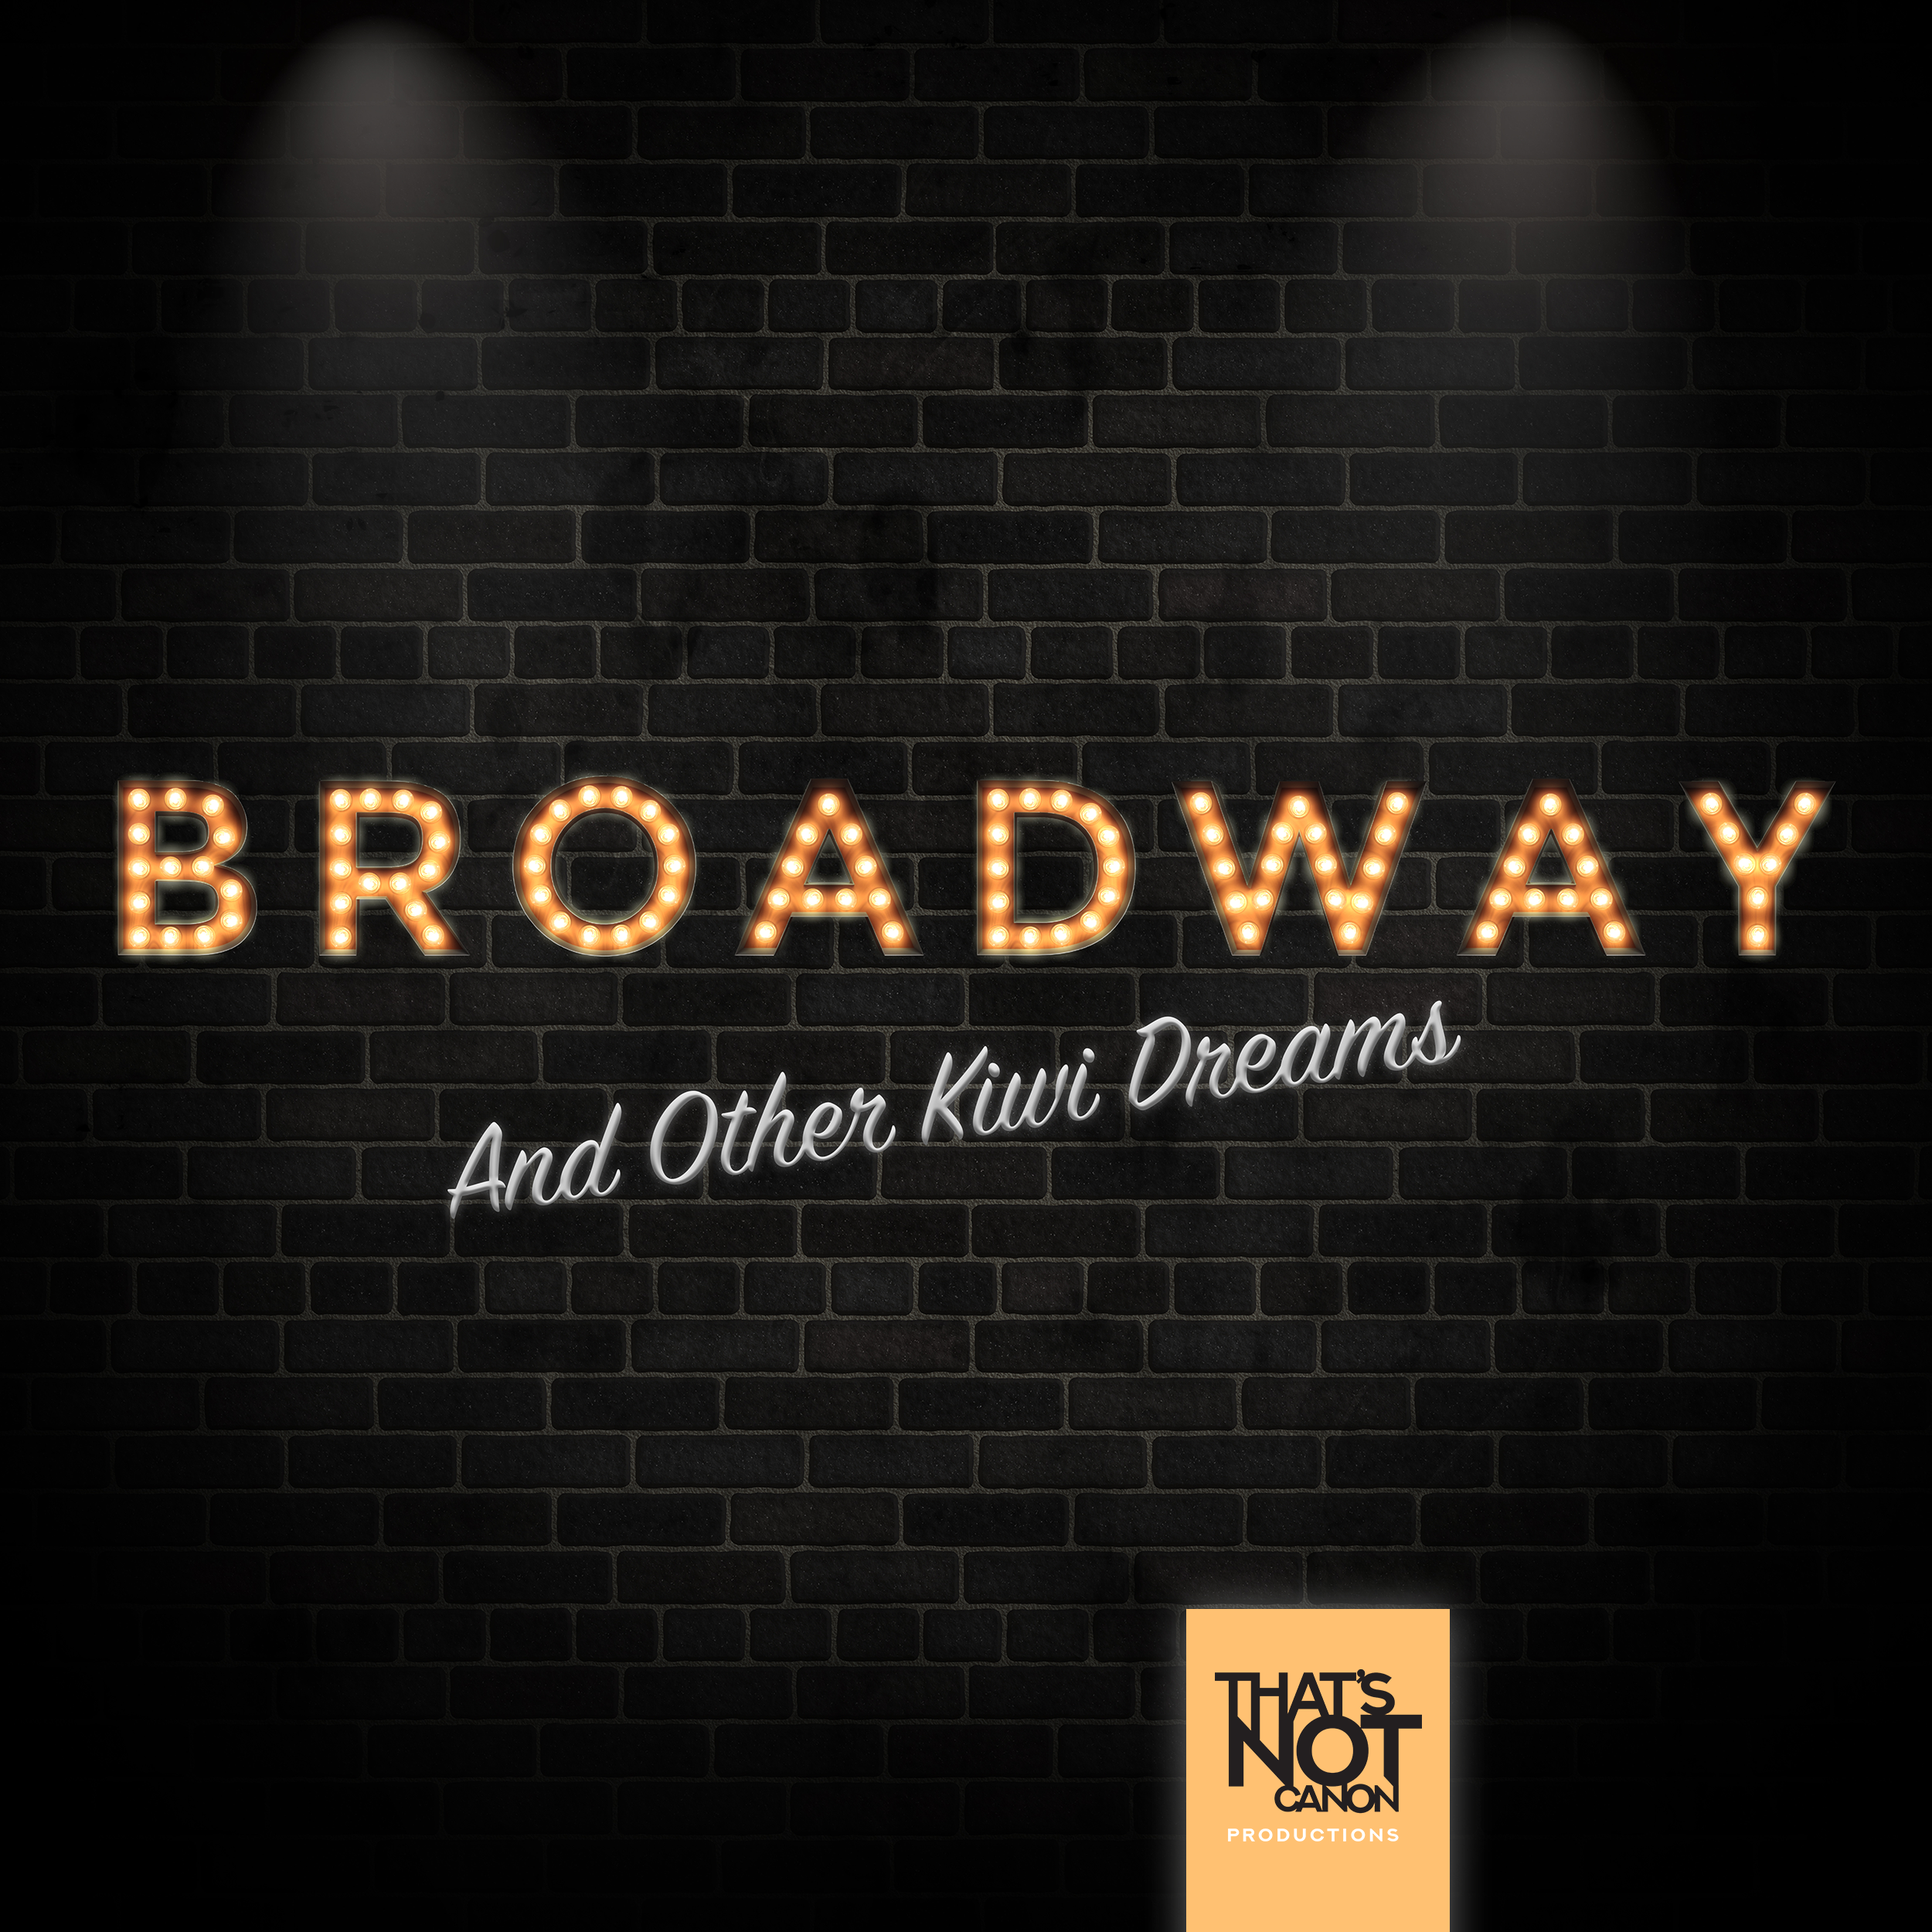 Broadway and Other Kiwi Dreams LOGO.png